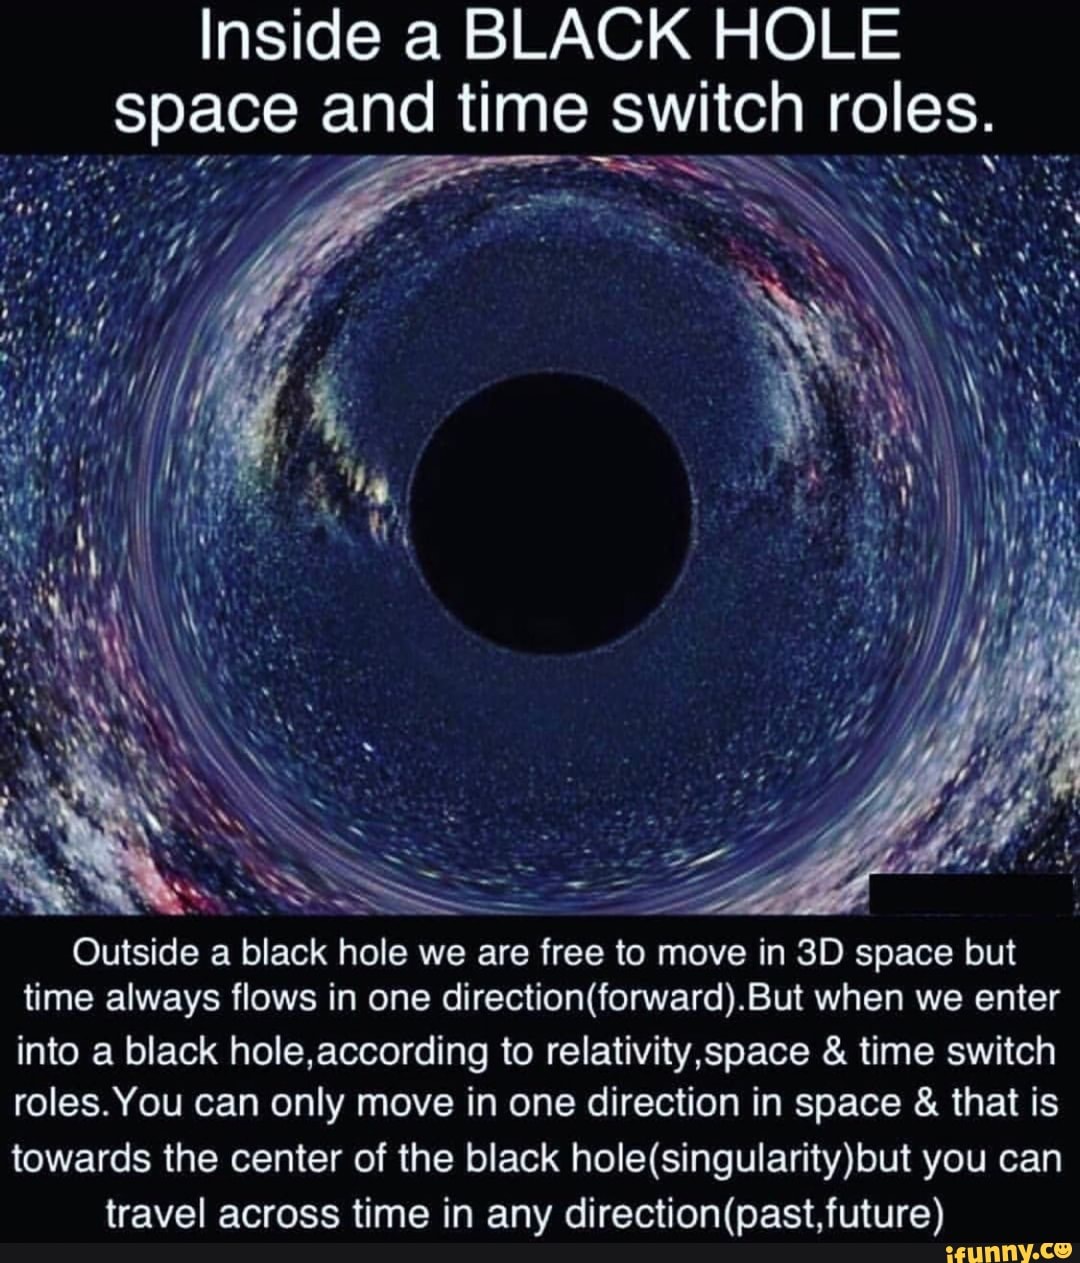 traveling into a black hole